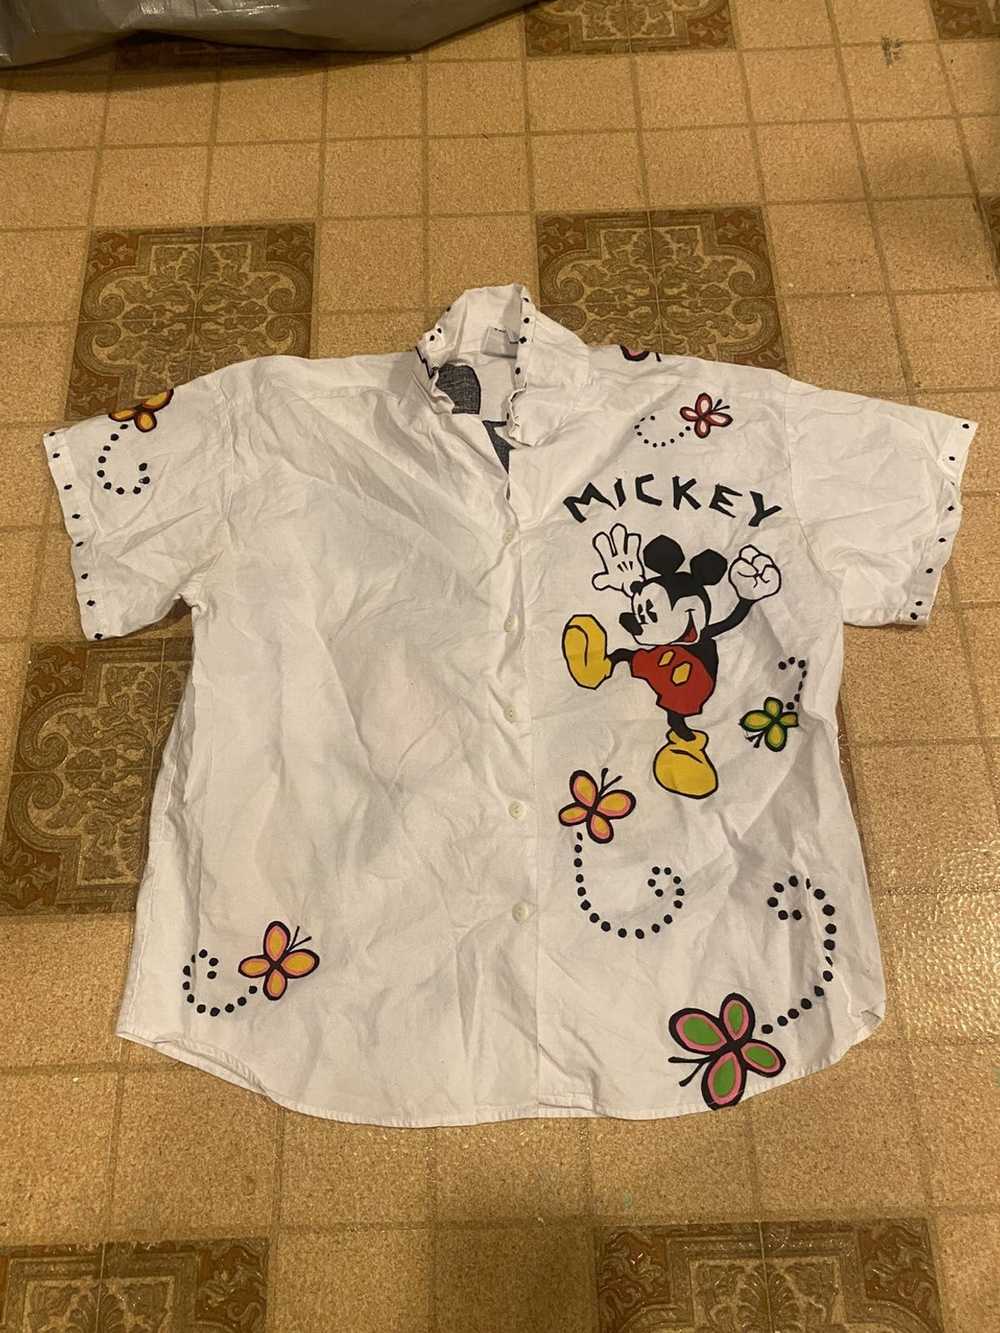 https://img.gem.app/670961828/1f/1694500337/mickey-and-co-mickey-mouse-mickey-and-co-shirt.jpg